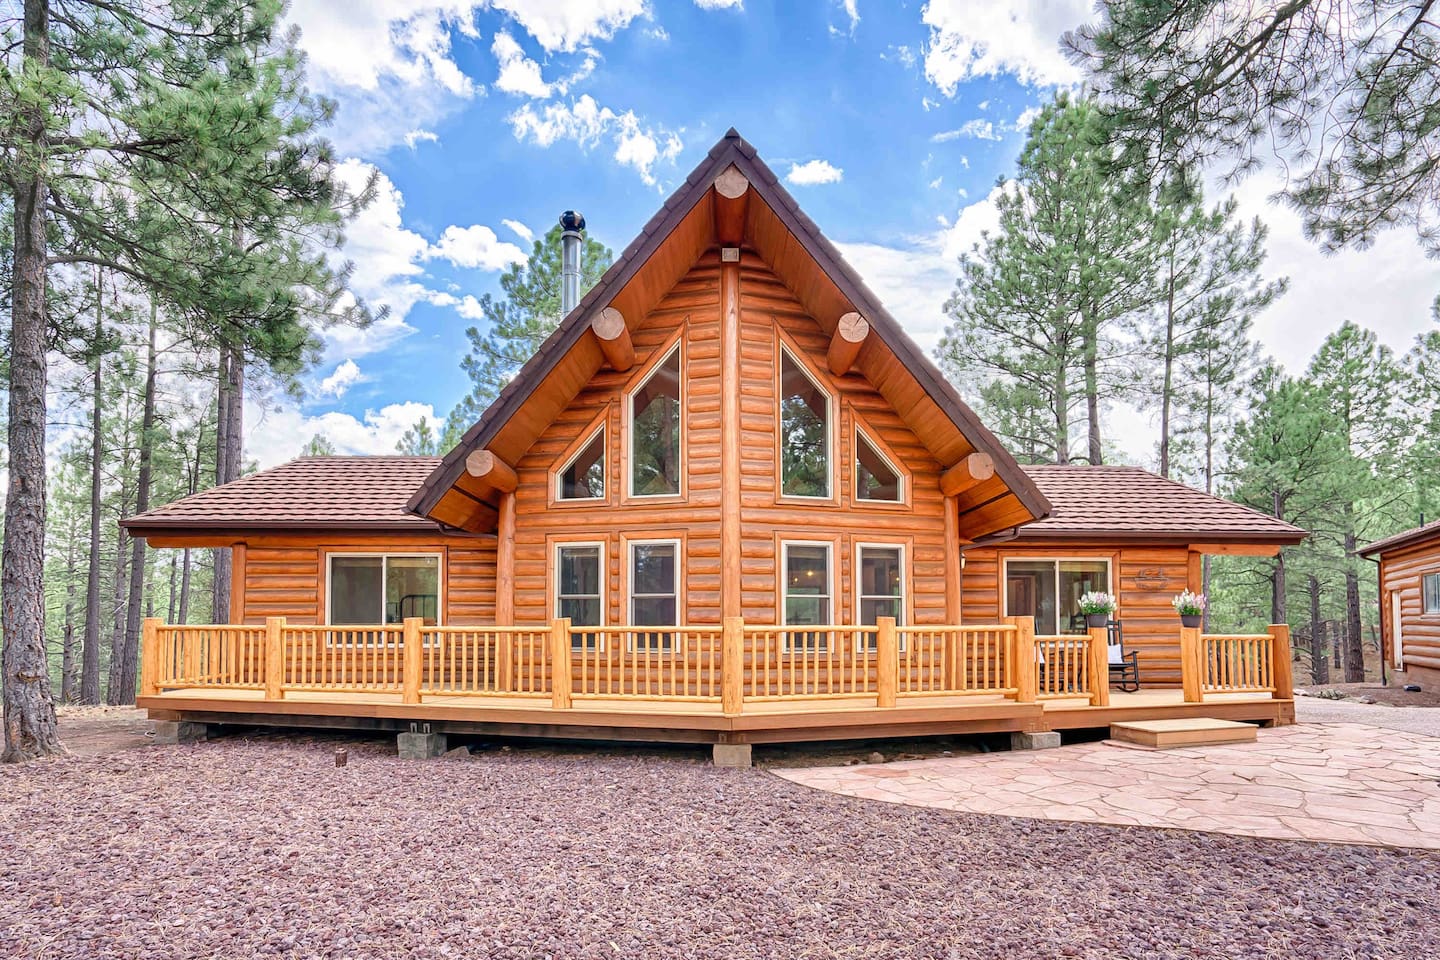 The Lincoln Log Cabin is one of the 15 best Airbnbs in Flagstaff